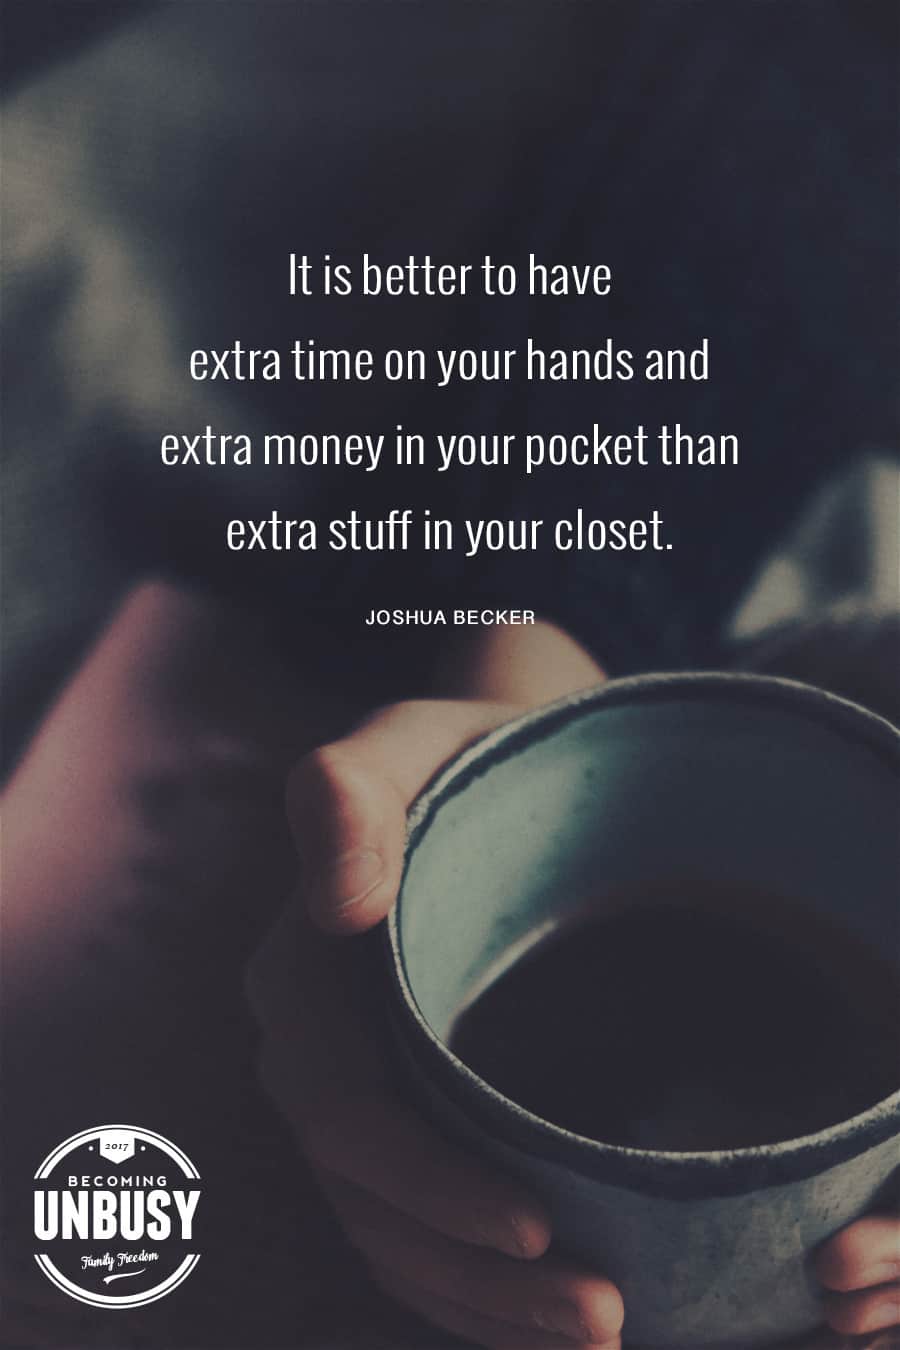 It is better to have extra time on your hands and extra money in your pockets than extra stuff in your closet. — Joshua Becker #quote #minimalism #intentionalliving #becomingunbusy #joshuabecker *Loving this collection of quotes